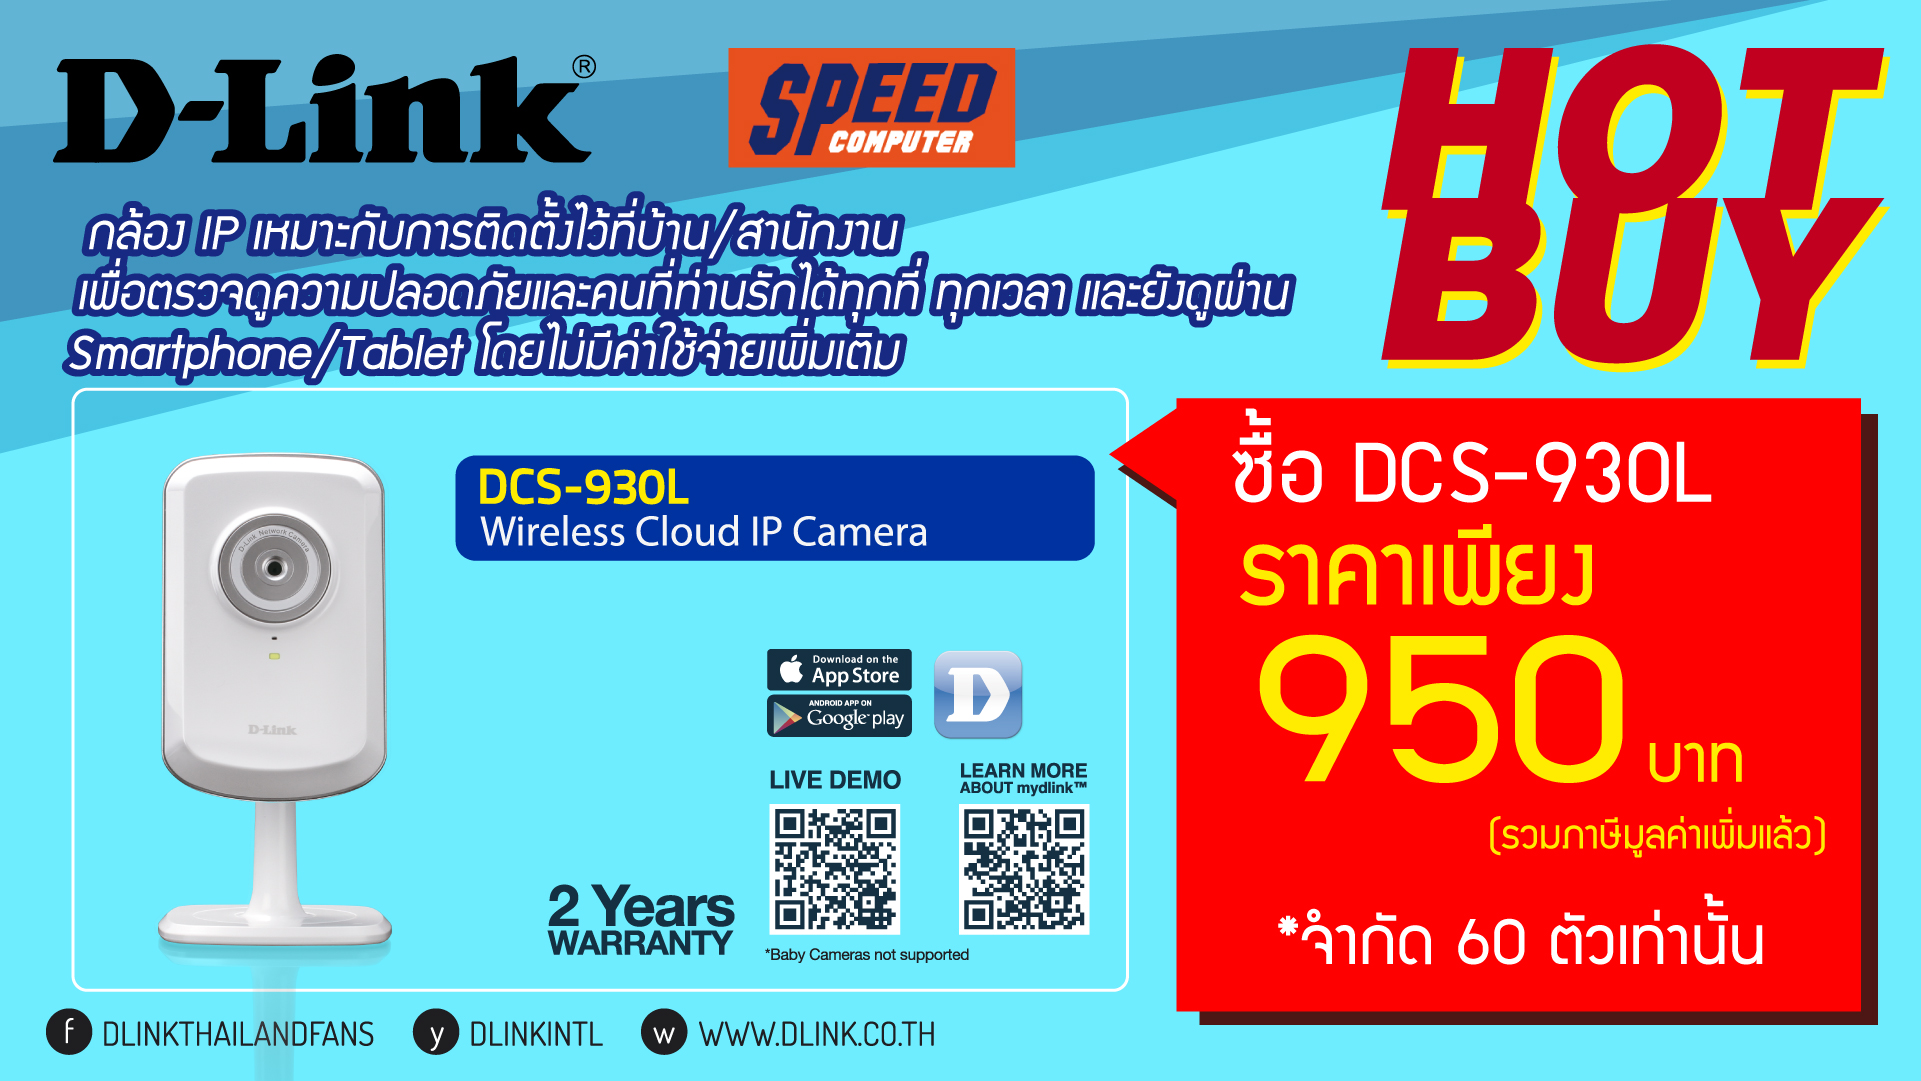 D-Link-Commart-Screen-for-Speed-March-16-04